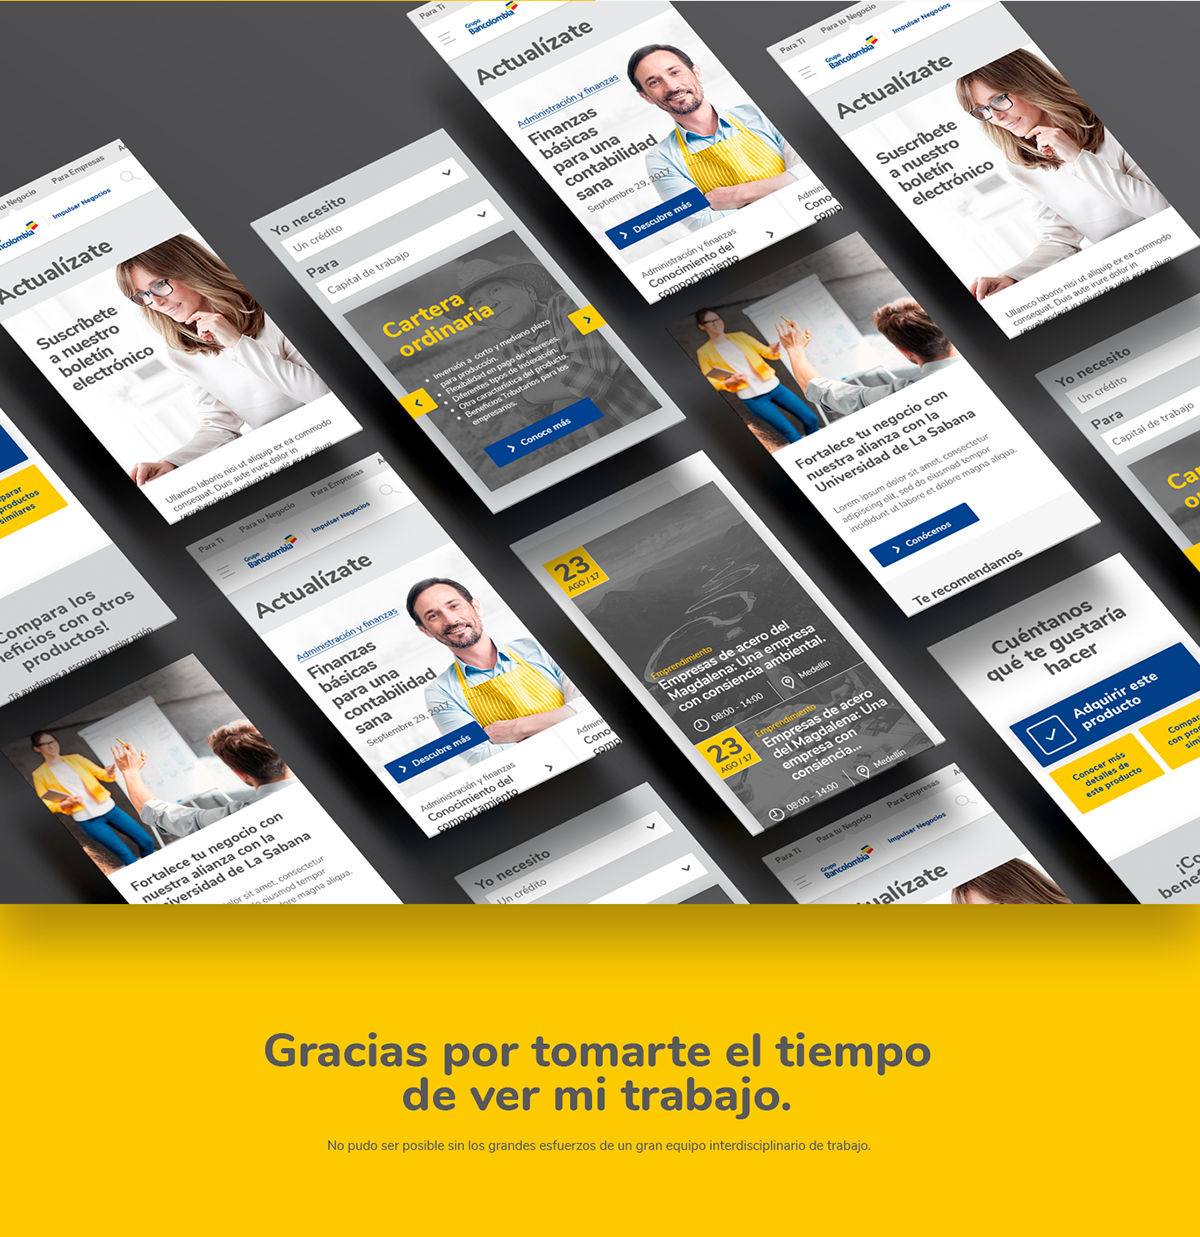 user experience user interface design Bank financial material design bancolombia motion graphics  minimalist yellow